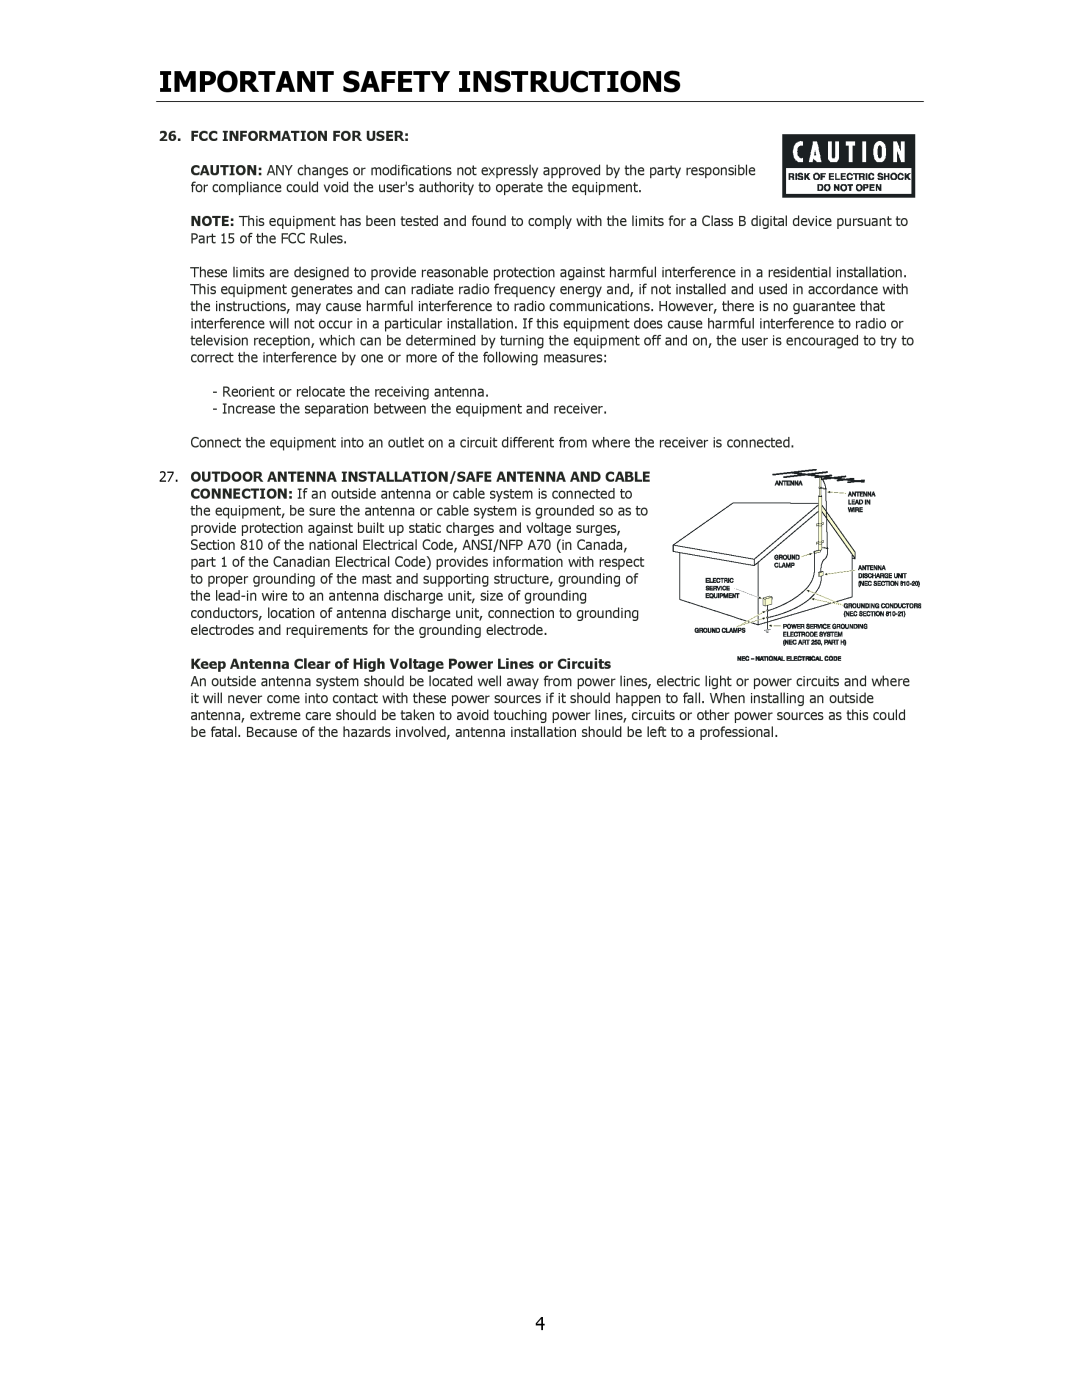 Cary Audio Design CAA 1 owner manual Important Safety Instructions, Fcc Information For User 